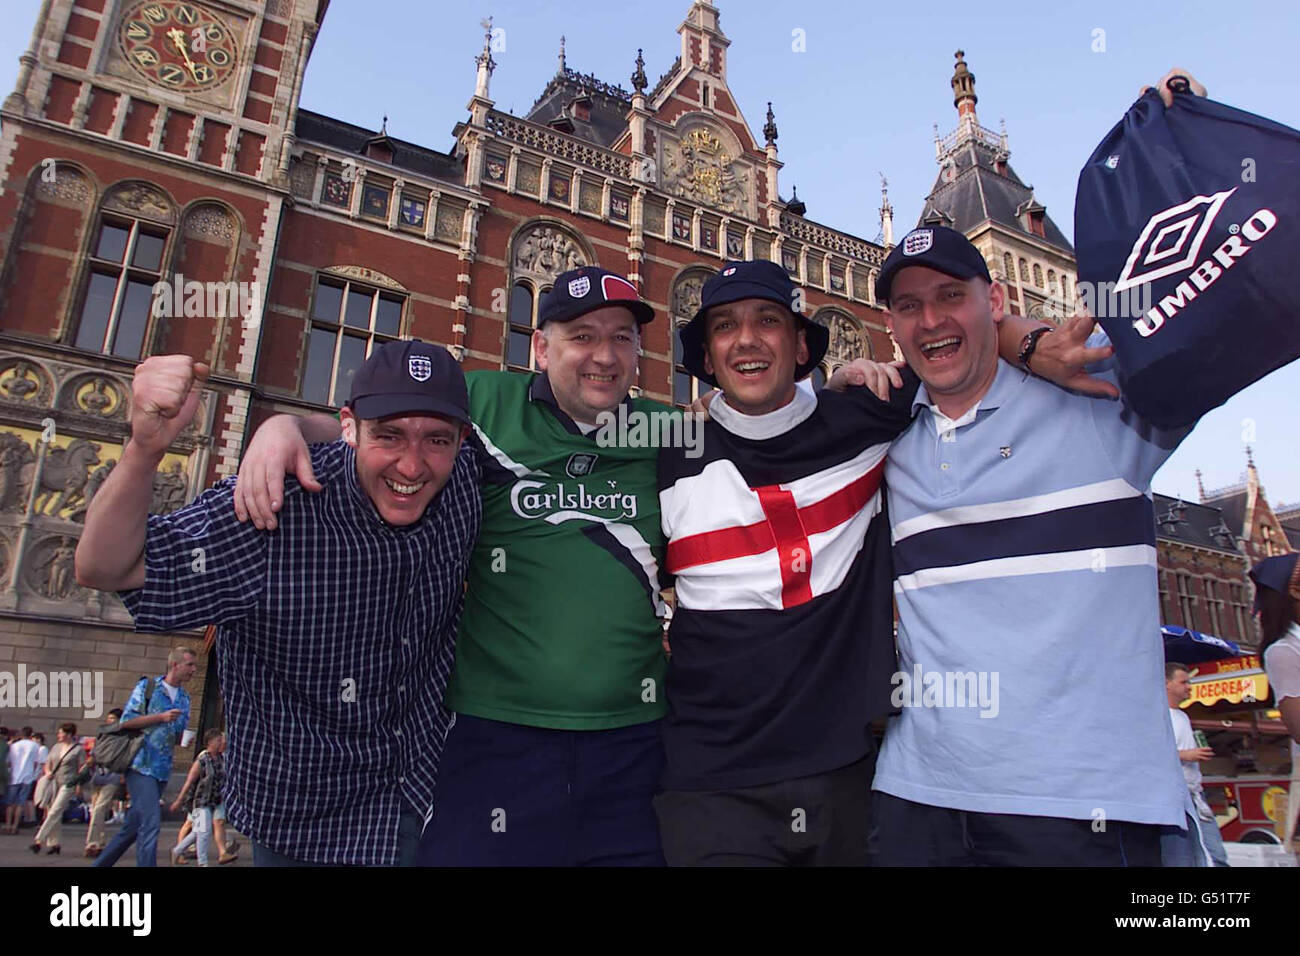 England soccer fans arrive at Amsterdam's Central Rail Station for a weekend of partying in the famous Dutch city to mark the start of the Euro 2000 football Championships. England's opening game is against Portugal in Eindhoven. * Left to right: Stuart Deans, Kevin Donovan, Stewart Dalziel, and Phil Jones, all from Cleethorpes, and are members of the supporter's club, managing to secure tickets for all the games right up to the final. Stock Photo